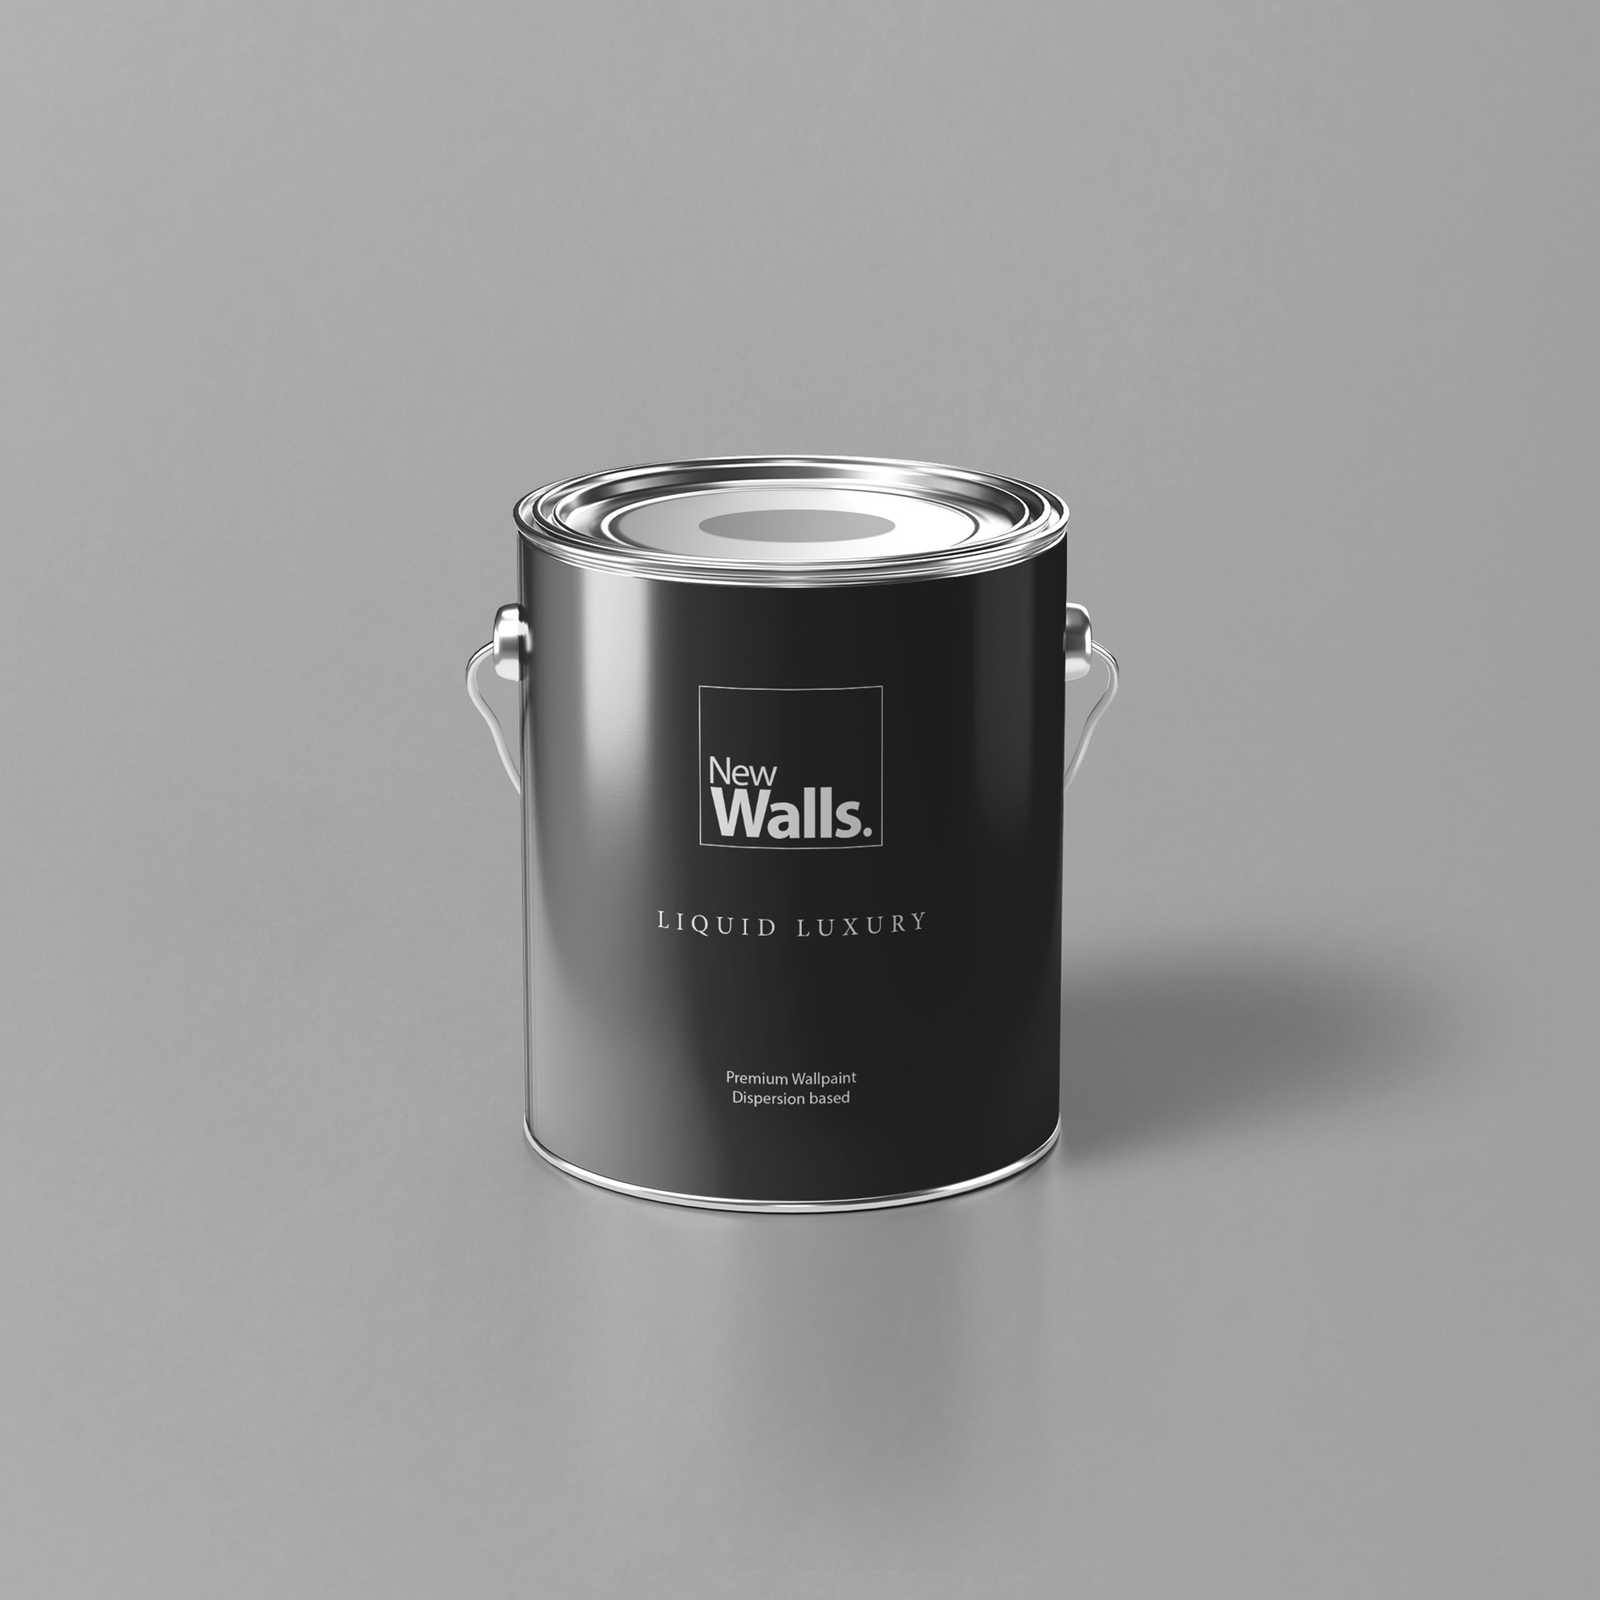 Premium Wall Paint Balanced Silver »Industrial Grey« NW101 – 2.5 litre
